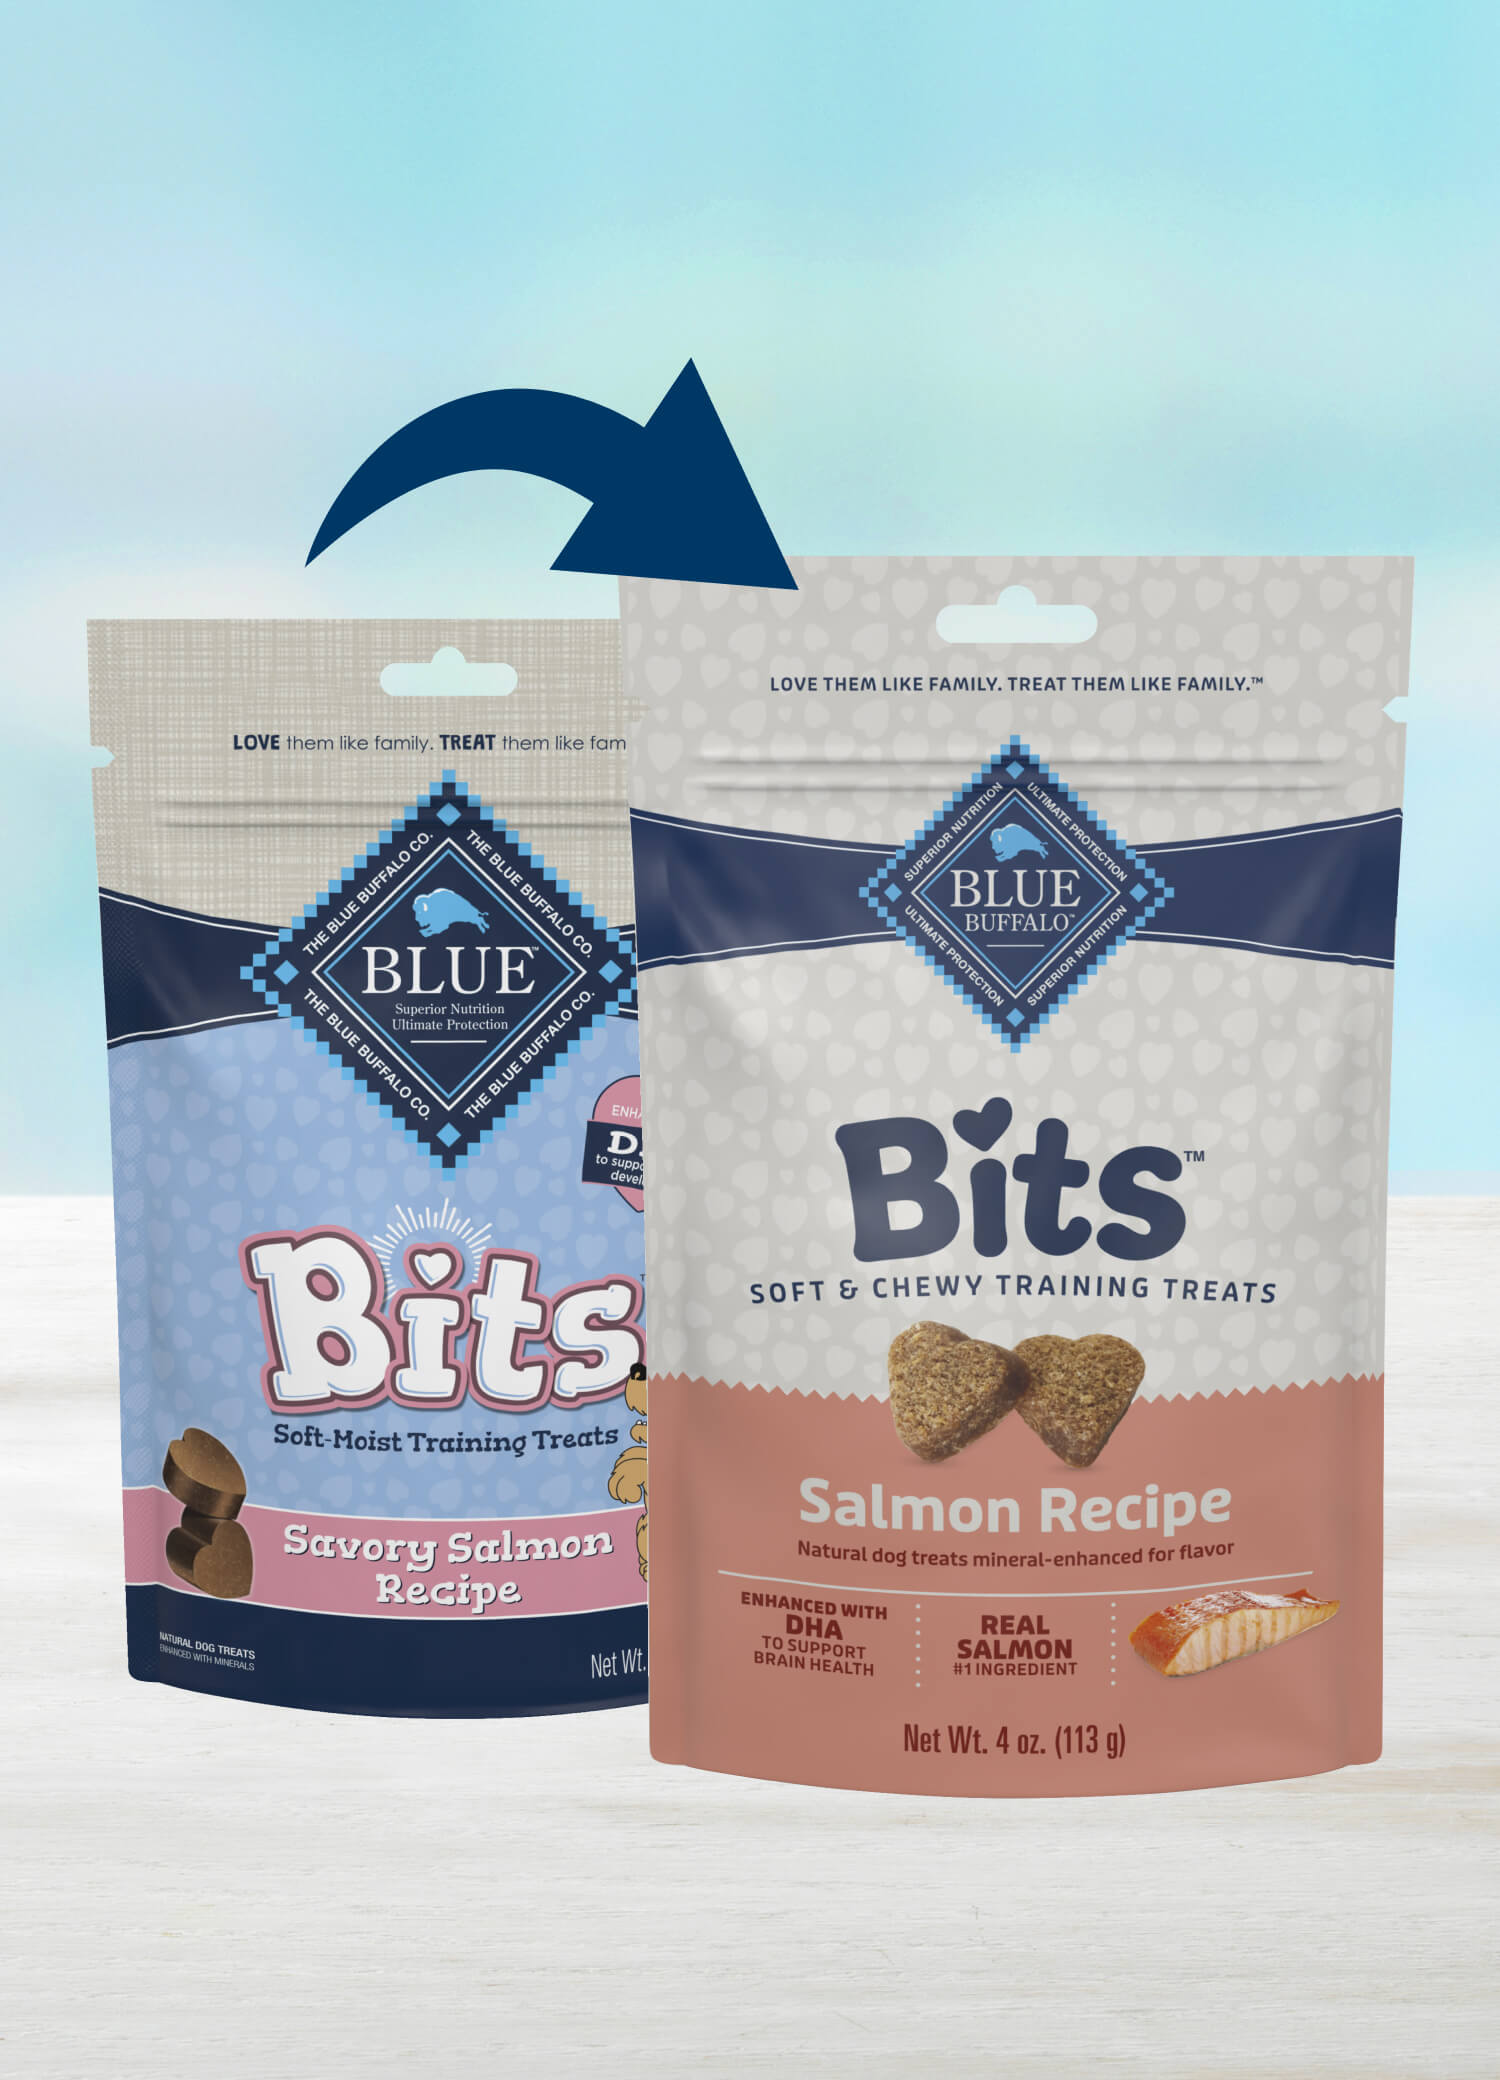 Blue Buffalo Bits Soft & Chewy Training Treats Savory Salmon Recipe dog treats bites in new packshot bags, highlighting the packaging transition.